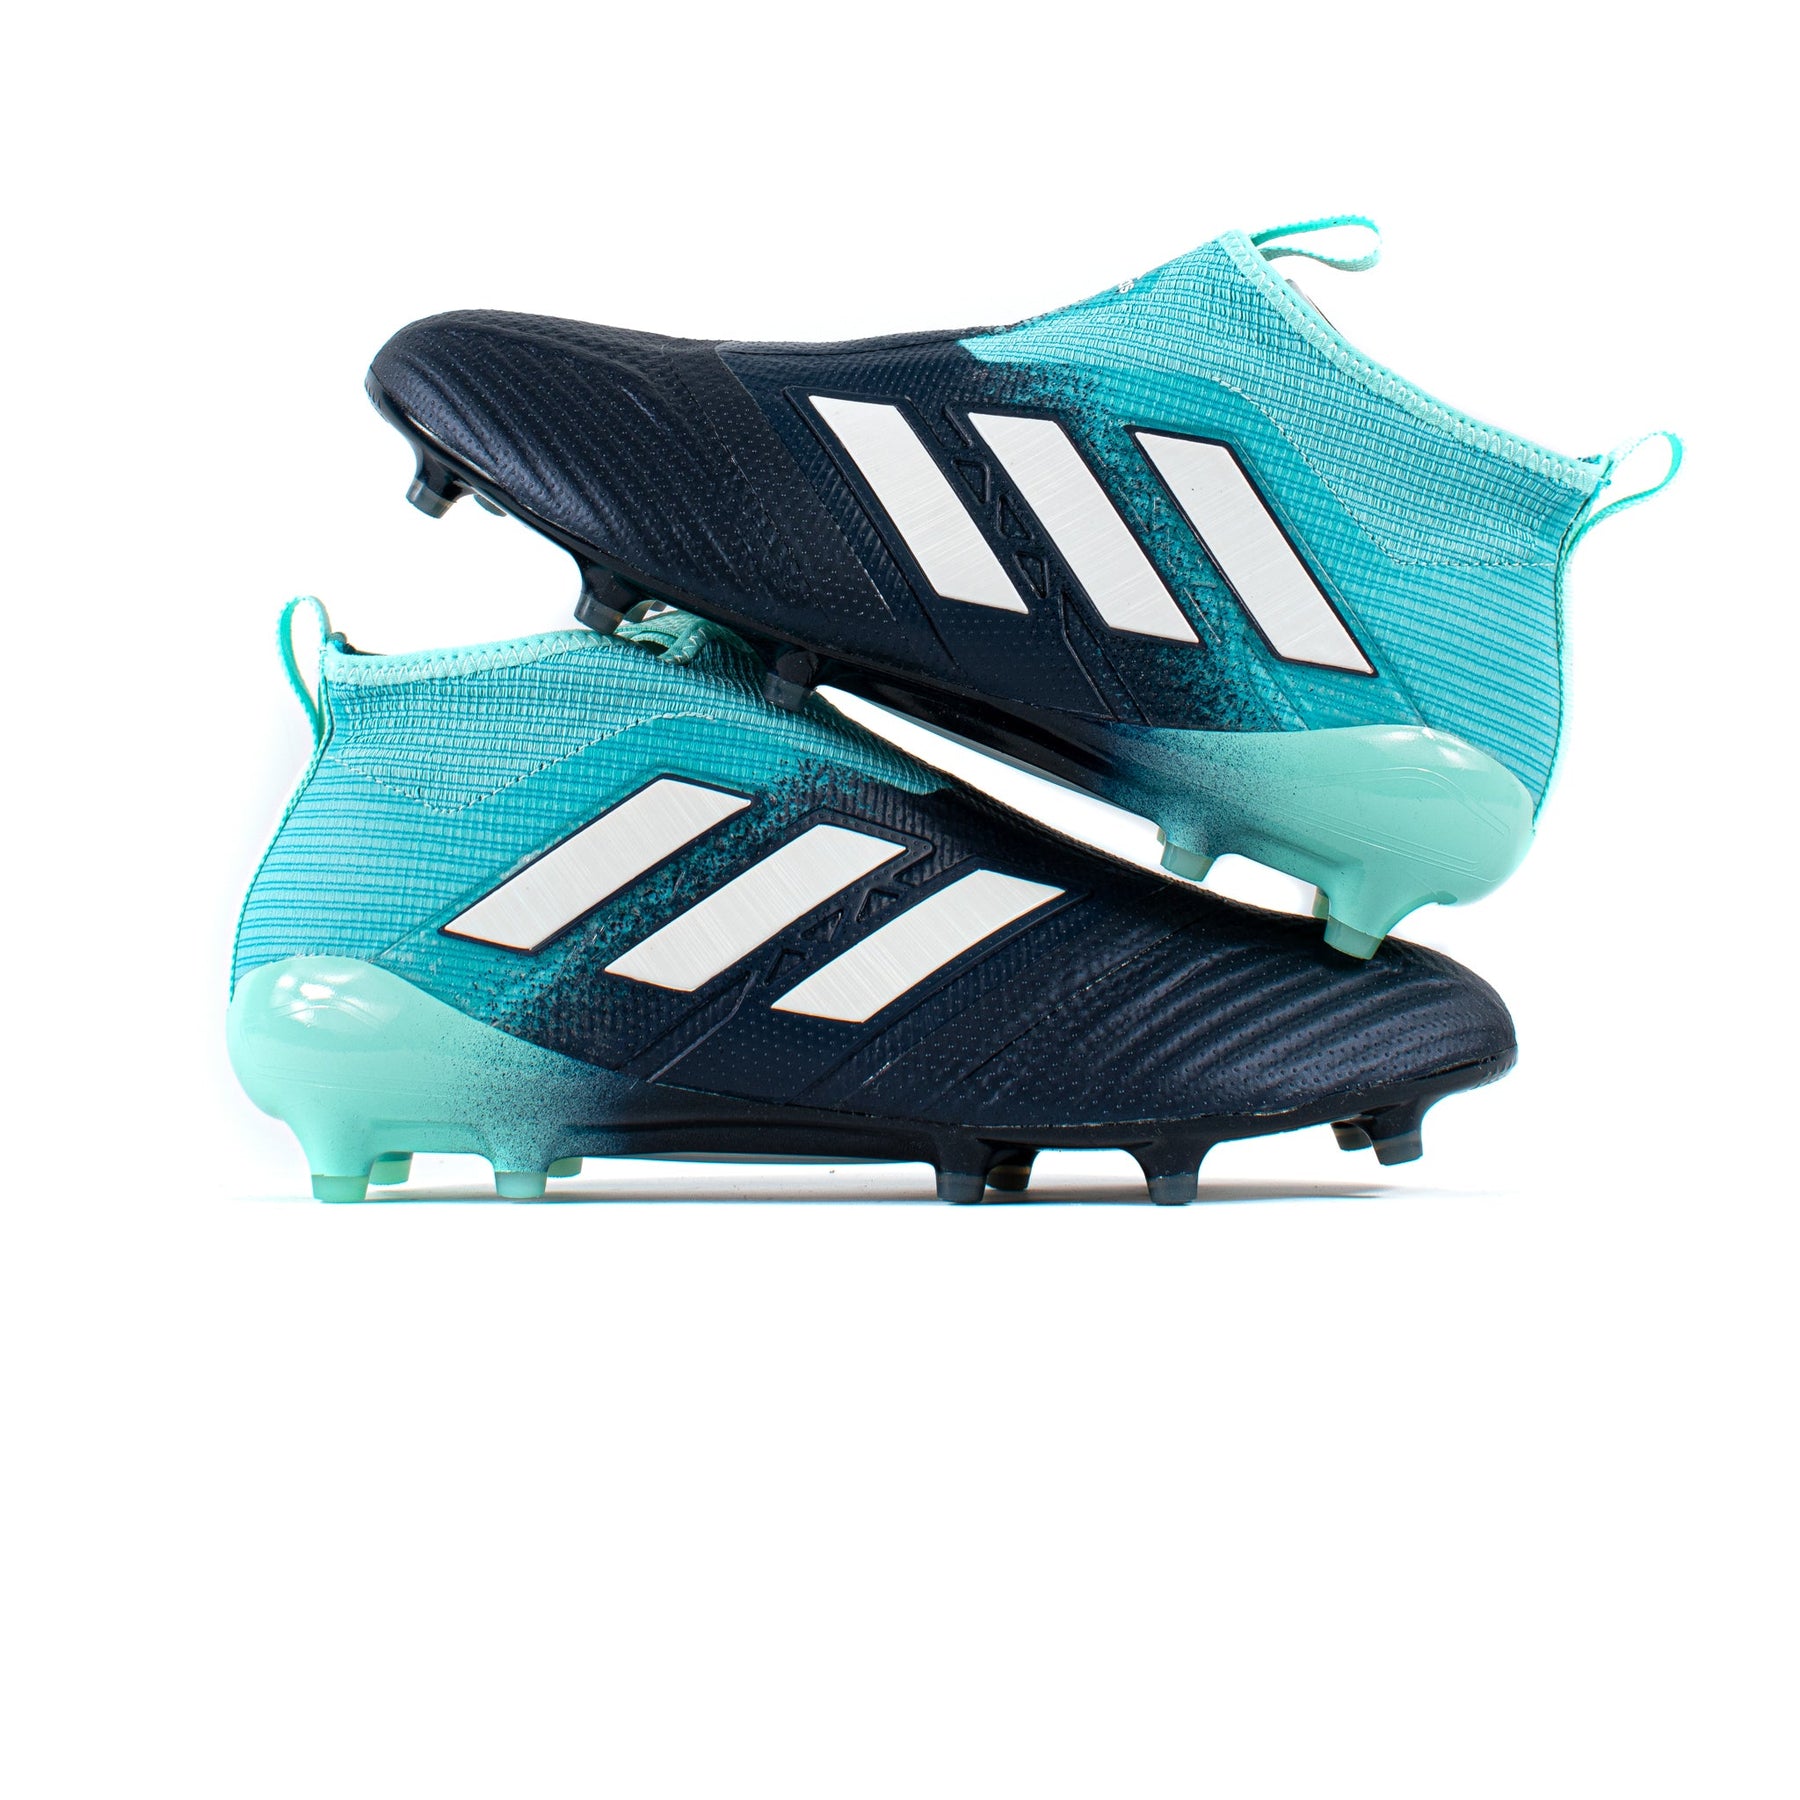 Adidas Ace 17+ PureControl Blue FG – Classic Cleats